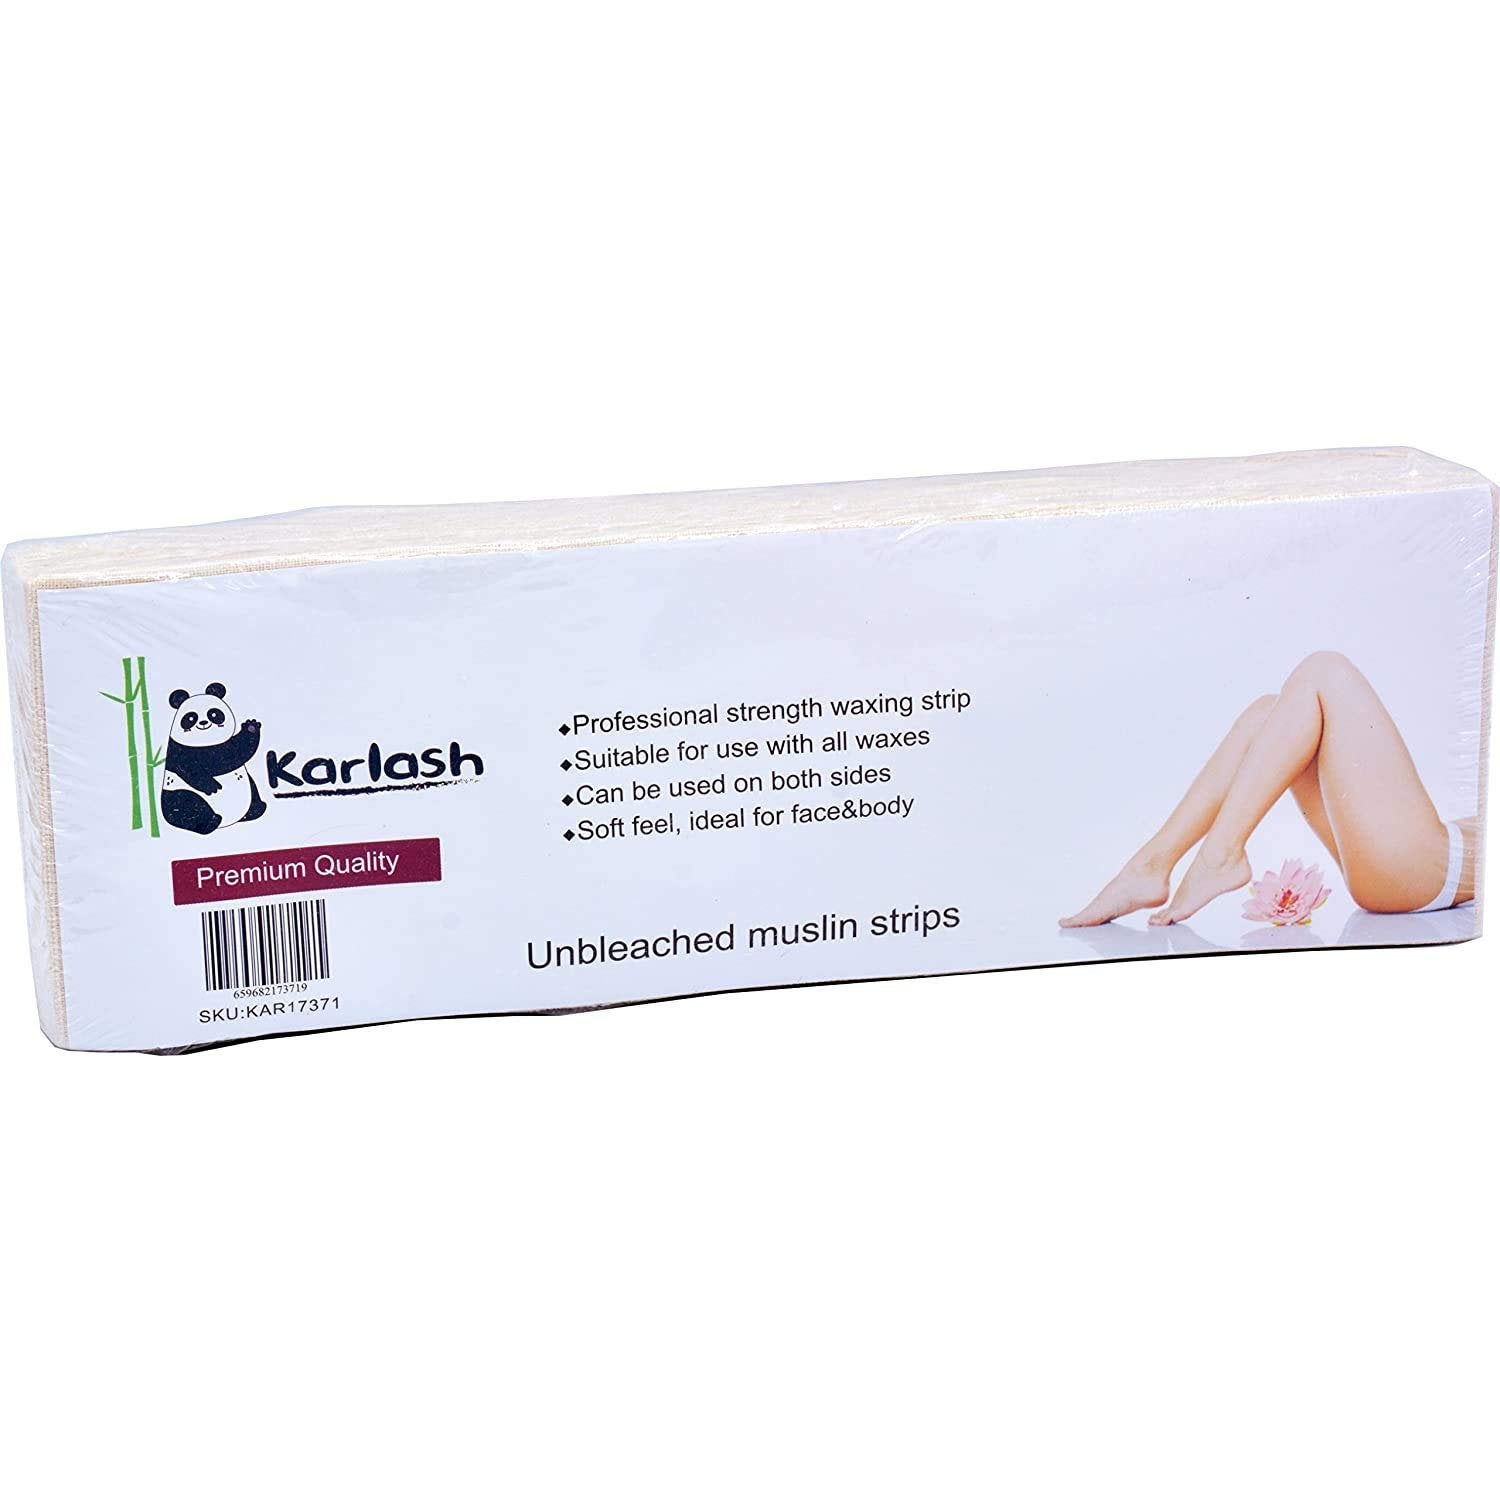 Karlash Unbleached Muslin Strip Natural Epilating Waxing Cloth 3inch x 9inch 100, Count (Pack of 5)